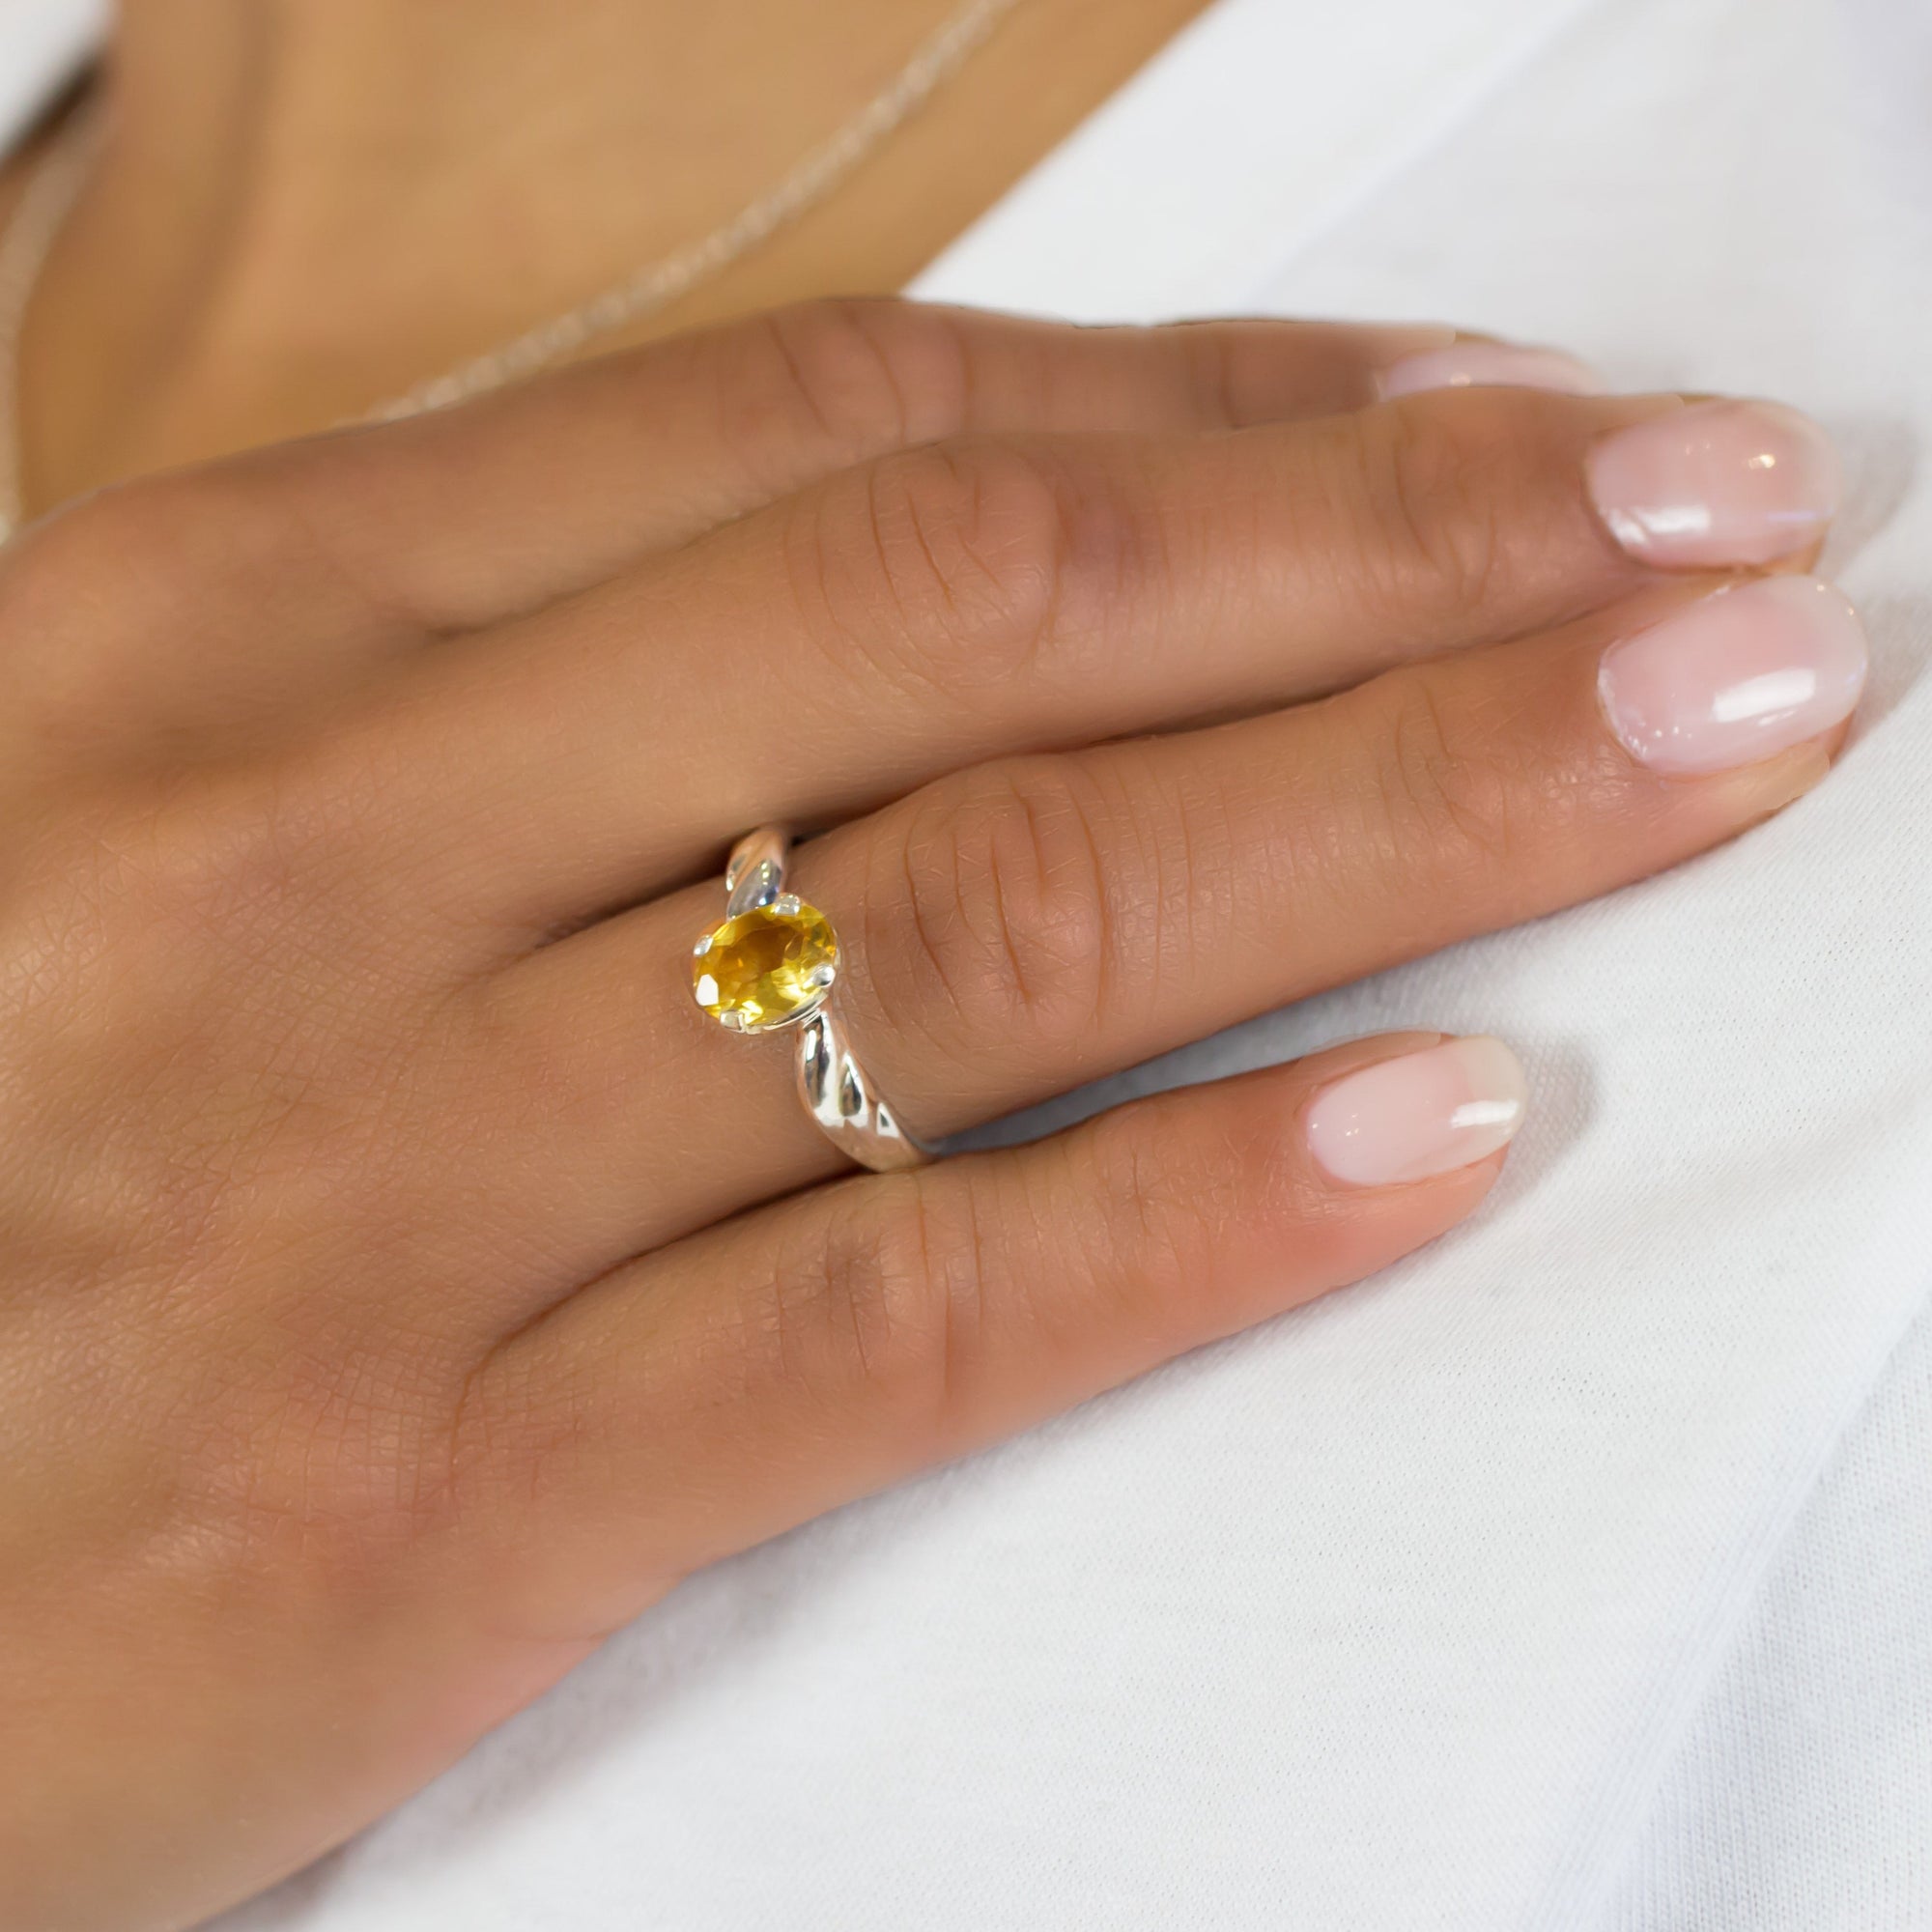 Yellow Citrine Ring With Silver claws and band Made in Earth